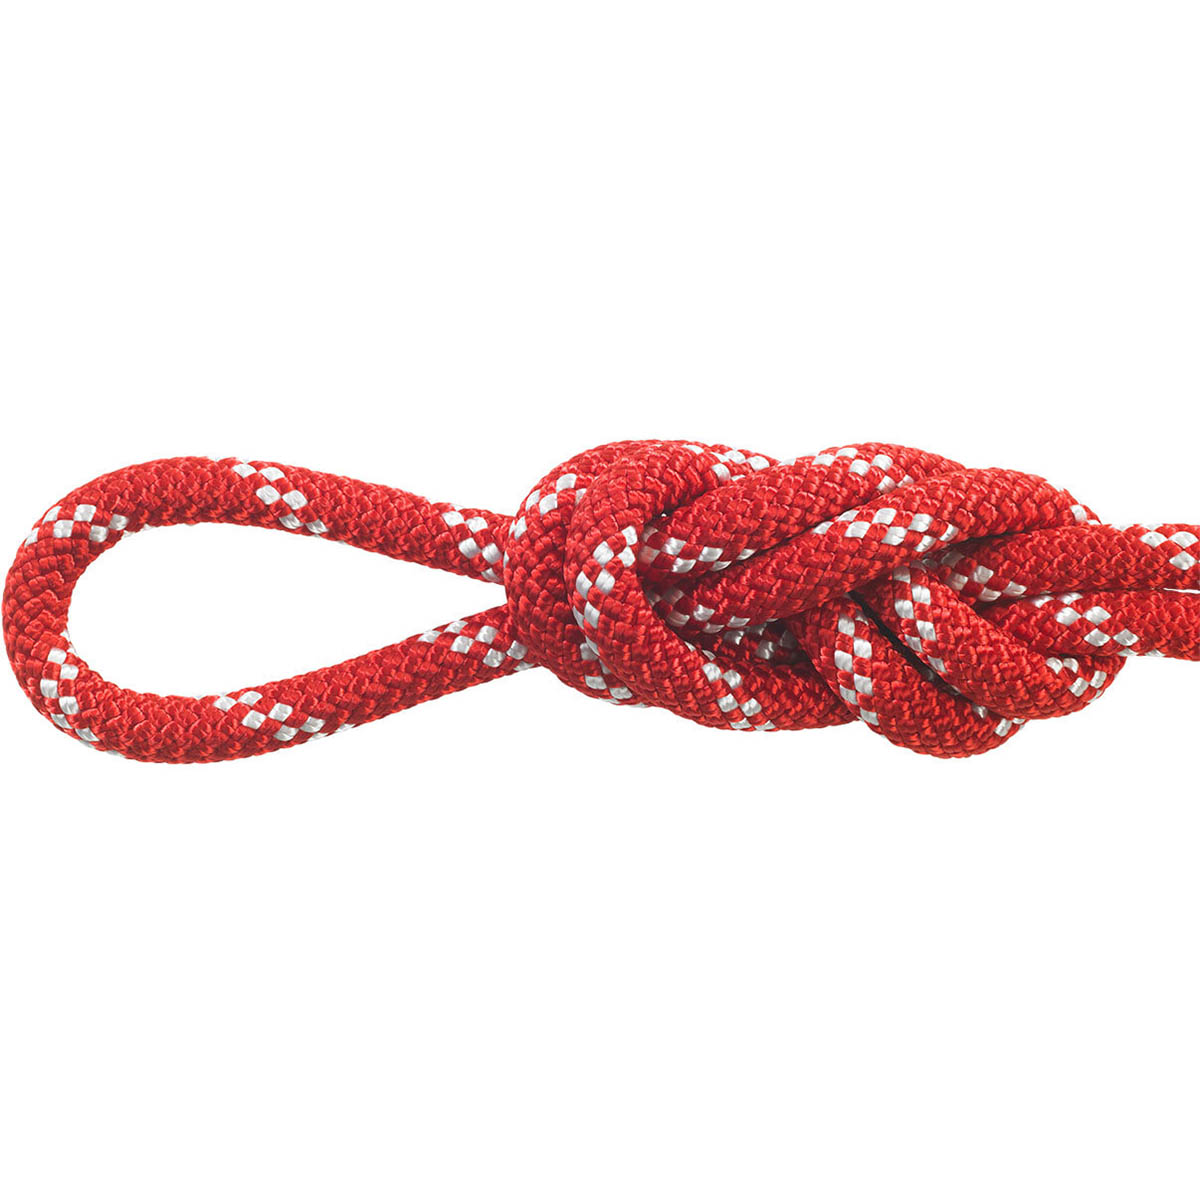 https://worknrescue.ca/wp-content/uploads/2015/08/teufelberger-newengland-maxim-kmiii-static-rope-red.jpg